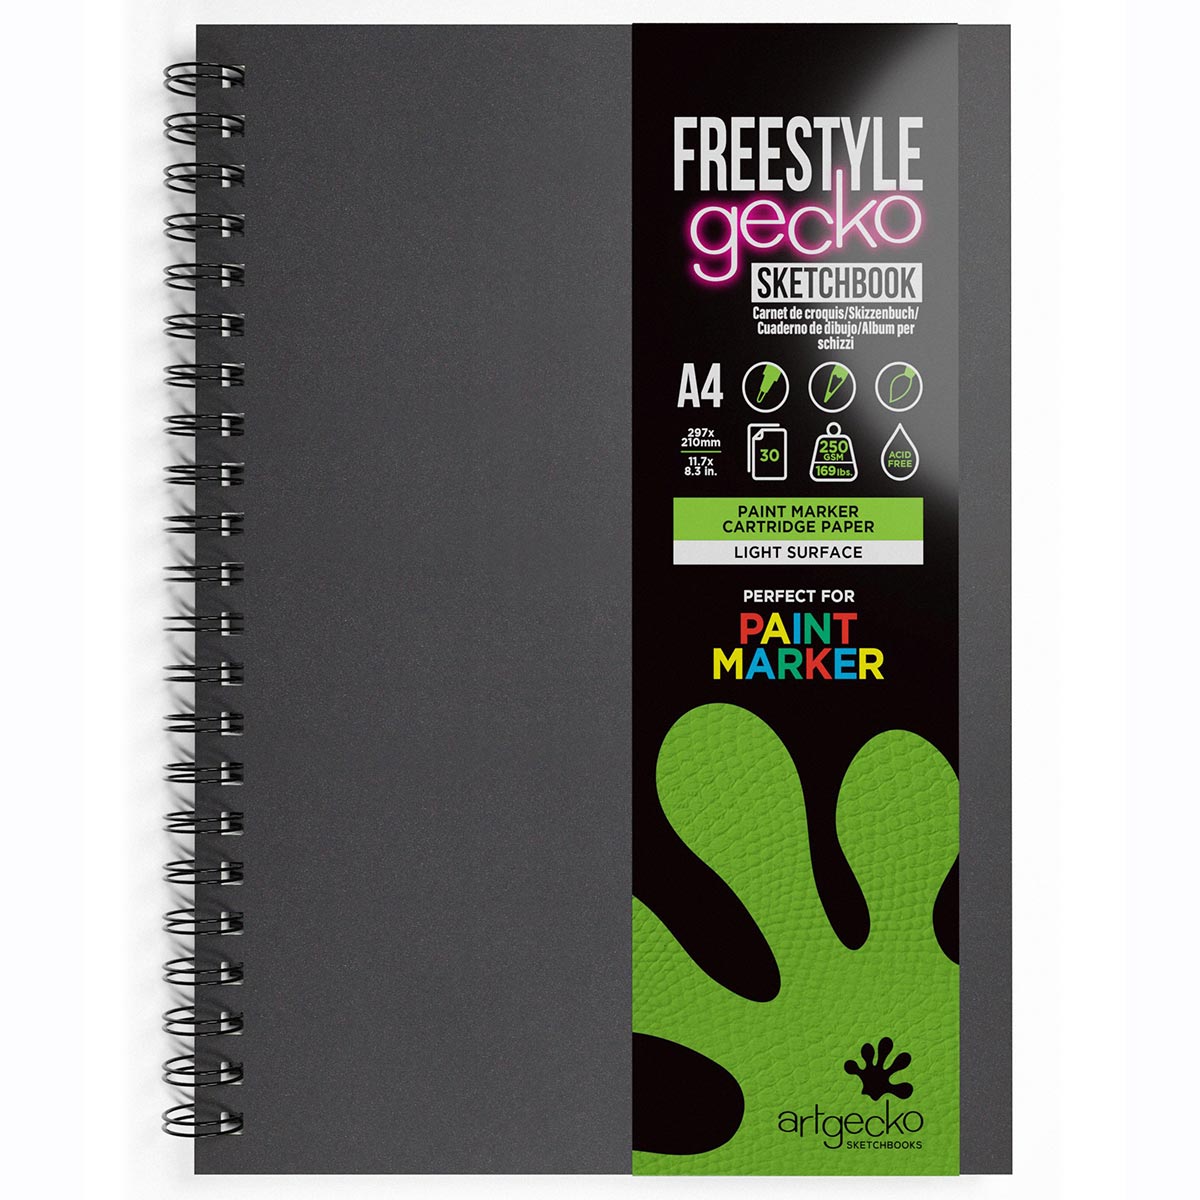 ArtGecko - Freestyle Sketchbook Paint Marker Smoother - A4 Portrait